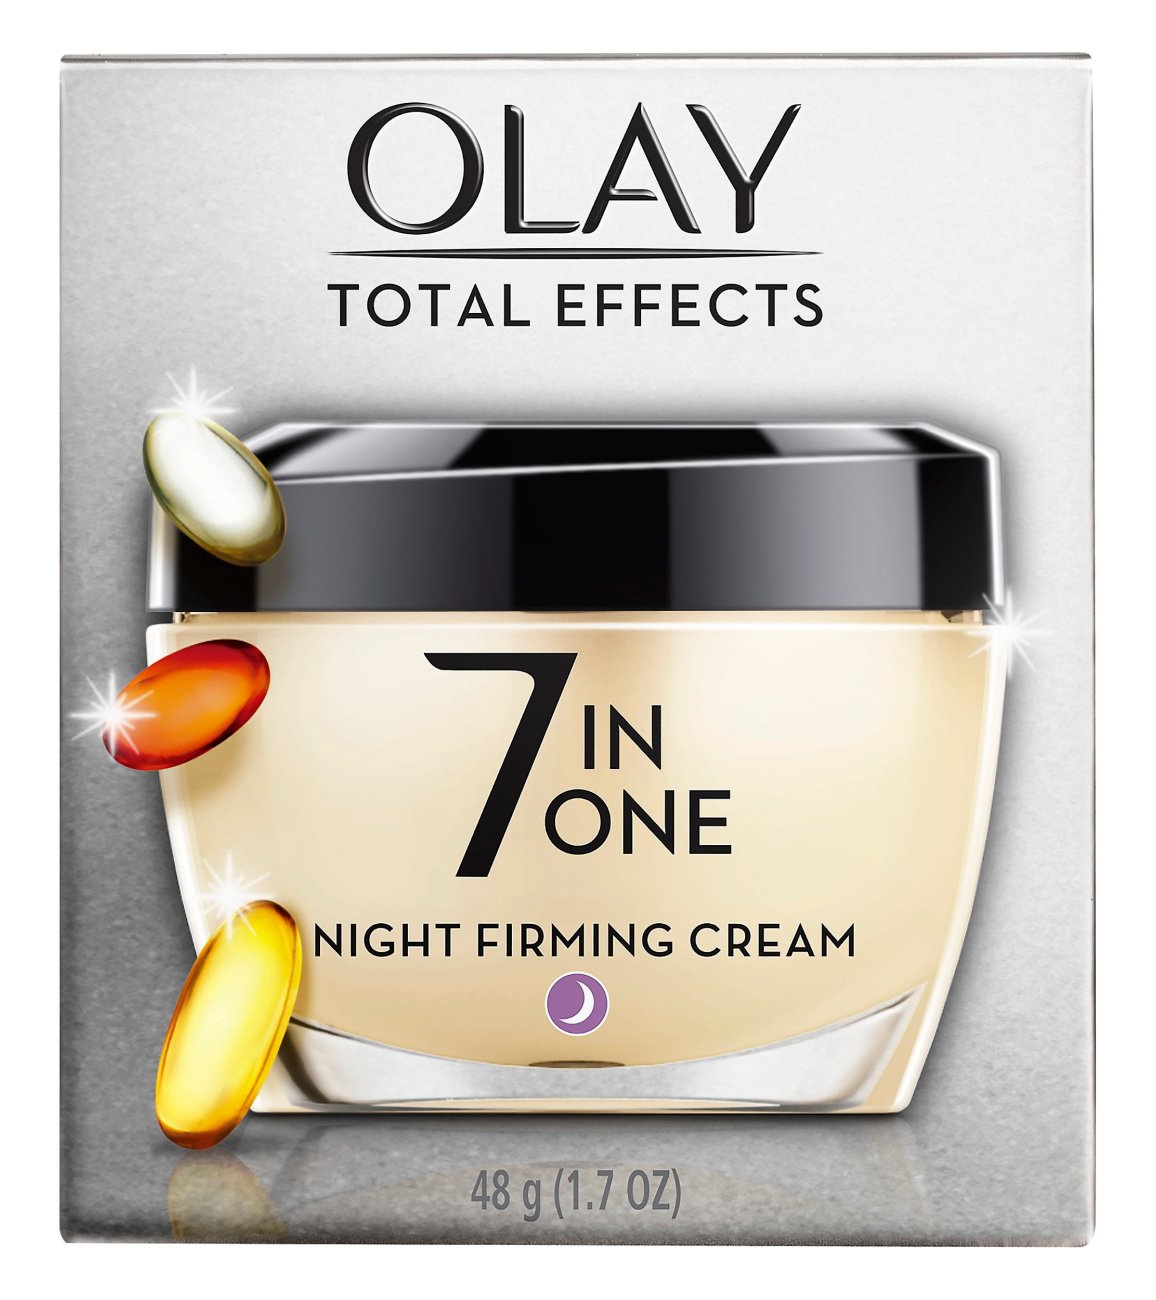 Olay Total Effects 7 In 1 Night Firming Cream